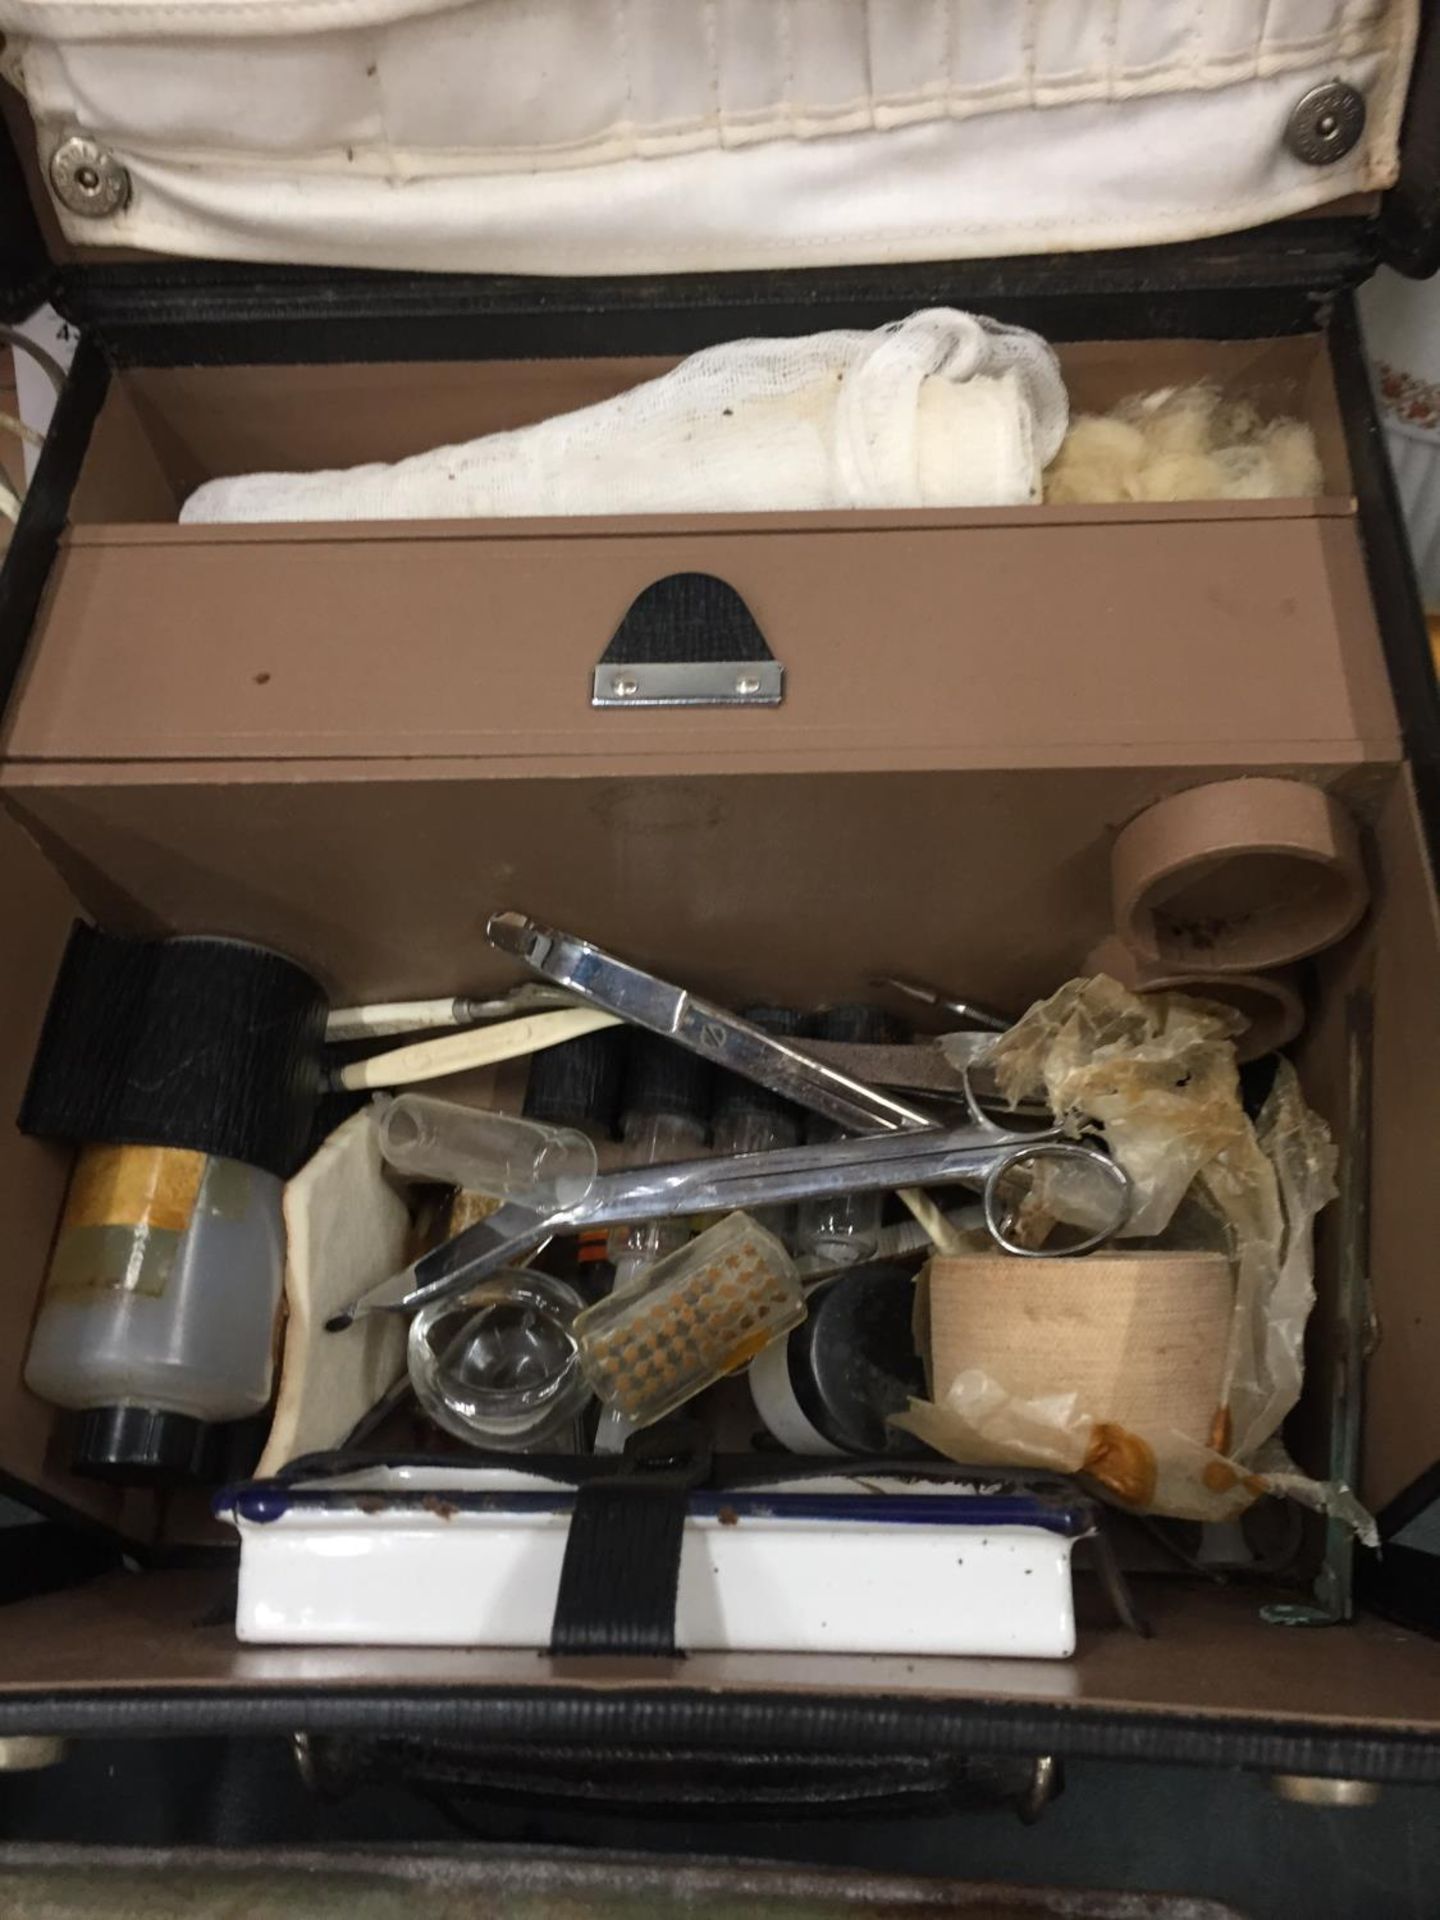 A MID CENTURY CASED CHIROPODISTS CASE- SCHOLL INSTRUMENTS ENCLOSED, TIN CONTAINING HABERDASHERY ETC - Image 2 of 4